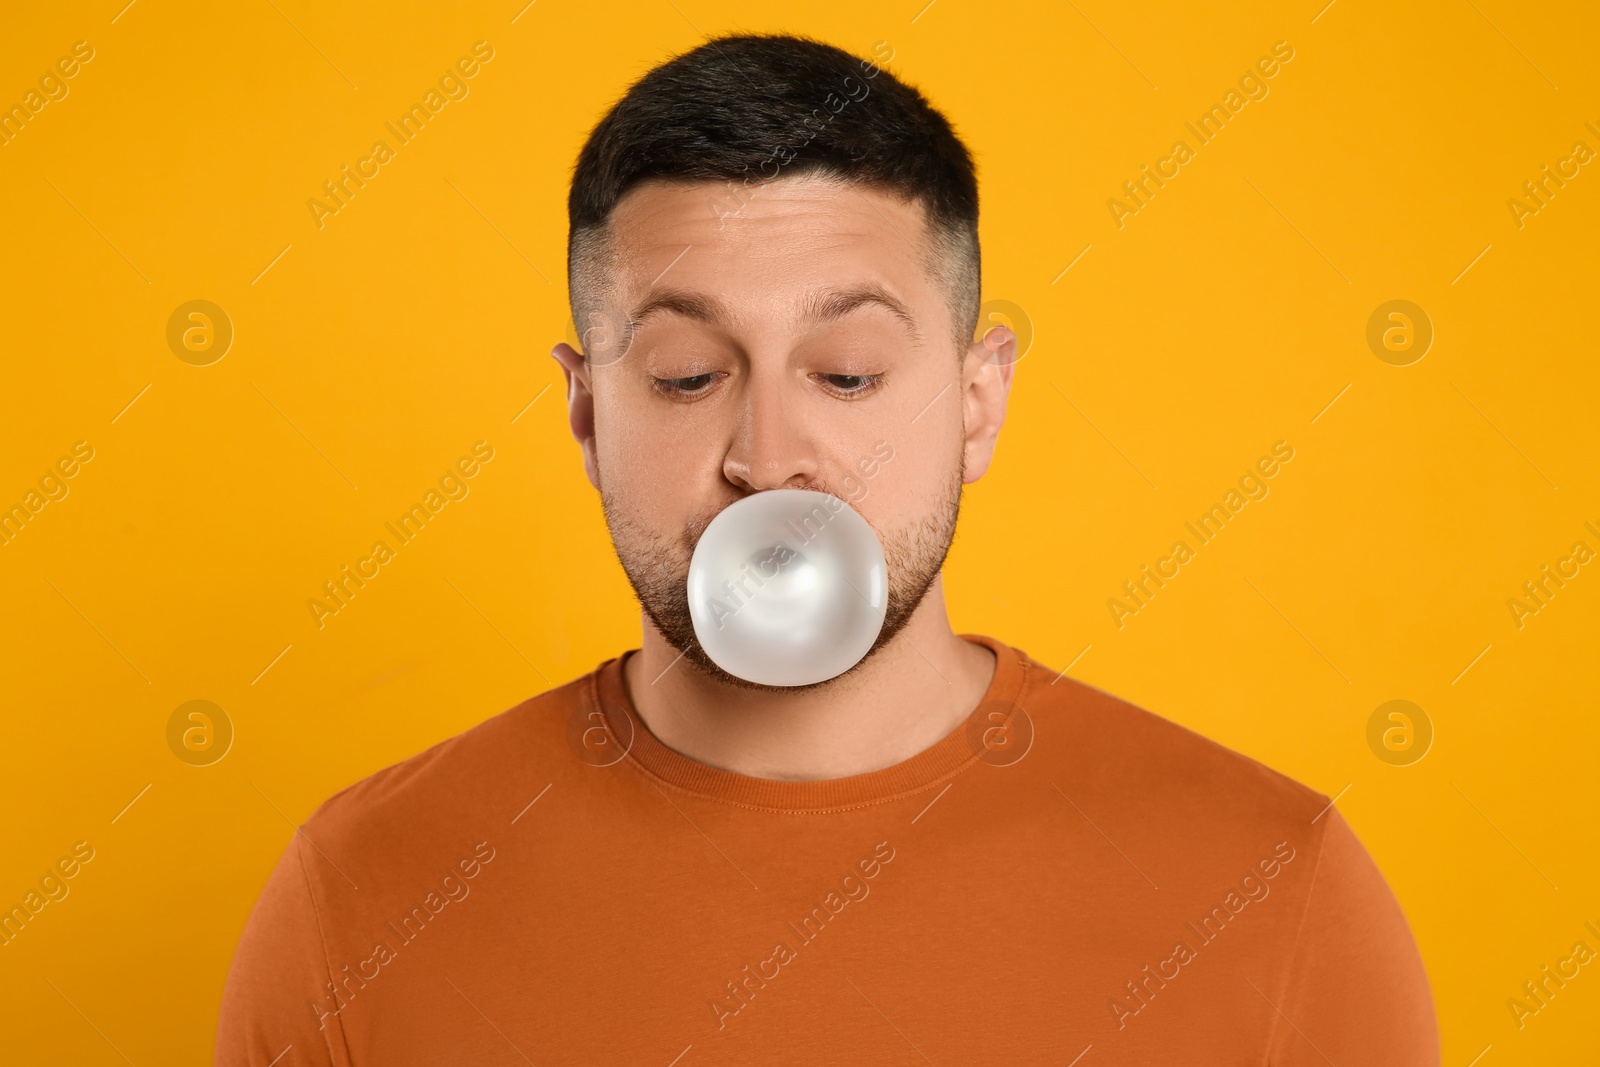 Photo of Handsome man blowing bubble gum on orange background